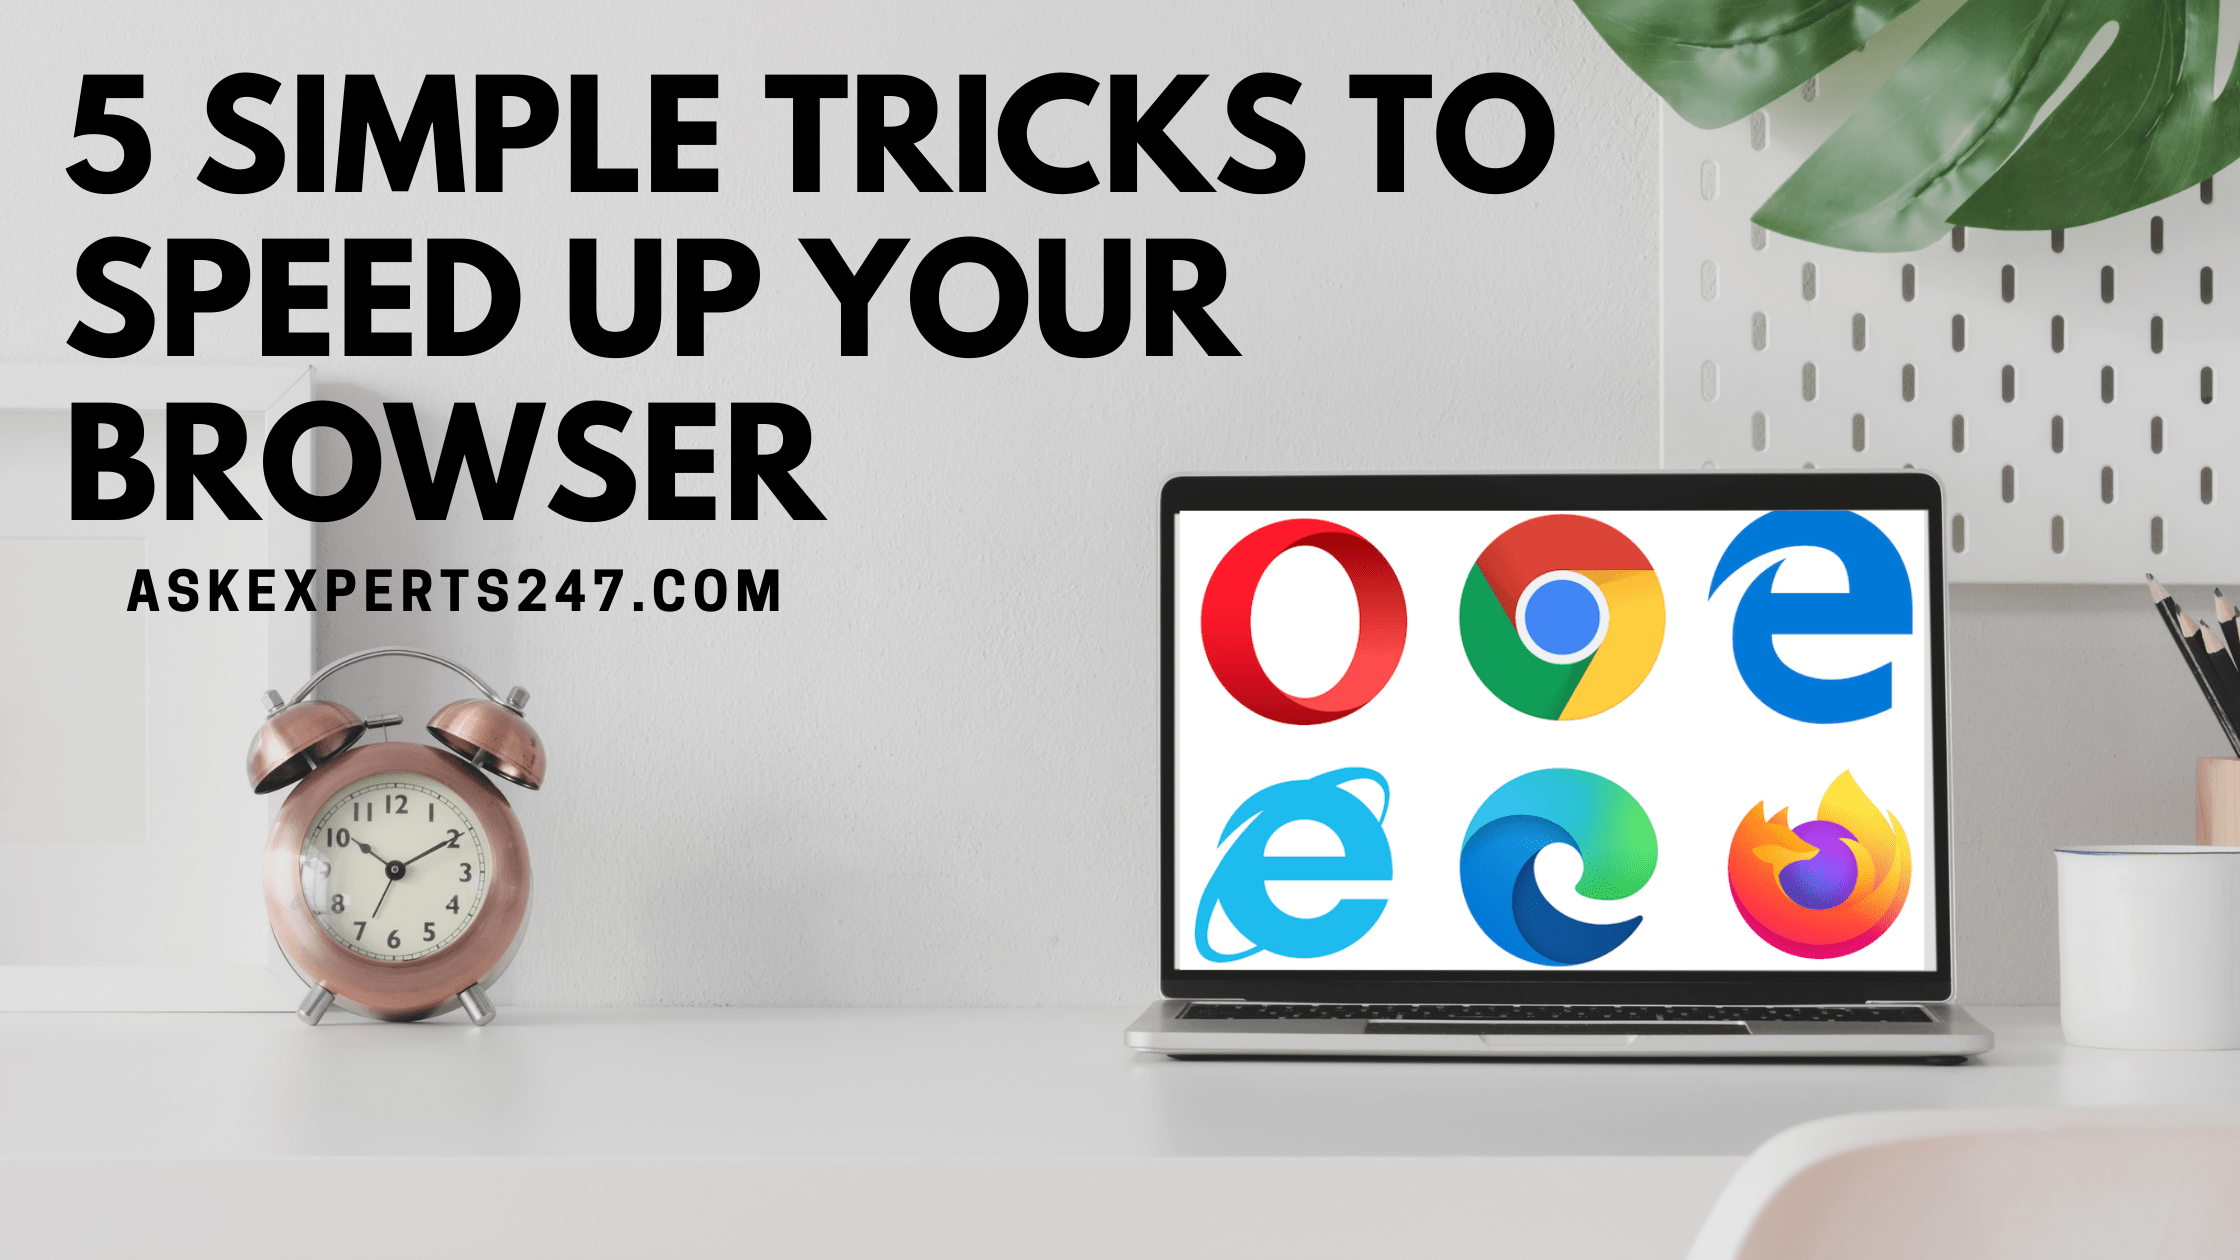 5 Simple Tricks to Speed up your Browser